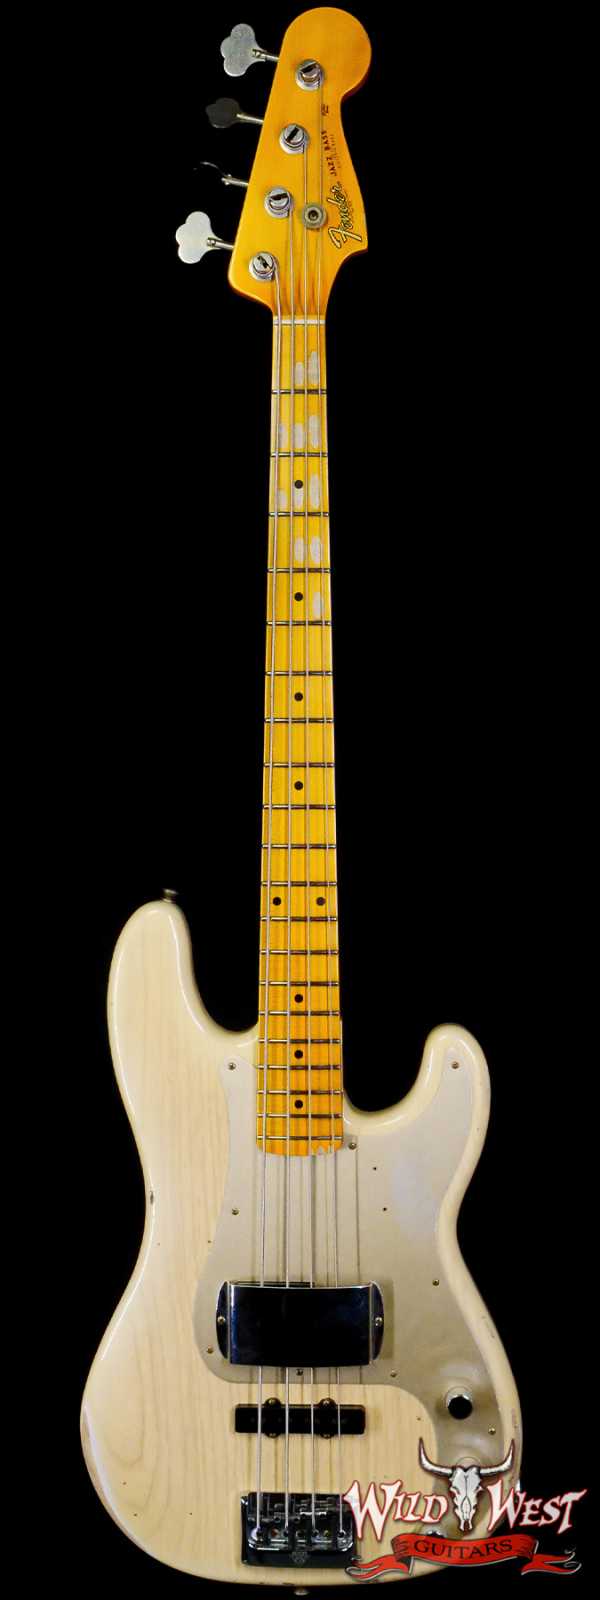 Fender Custom Shop Limited Edition Special 1959 P-Bass Precision Bass w/ Jazz Bass Neck Hand-Wound P/J Pickups Relic Natural Blonde